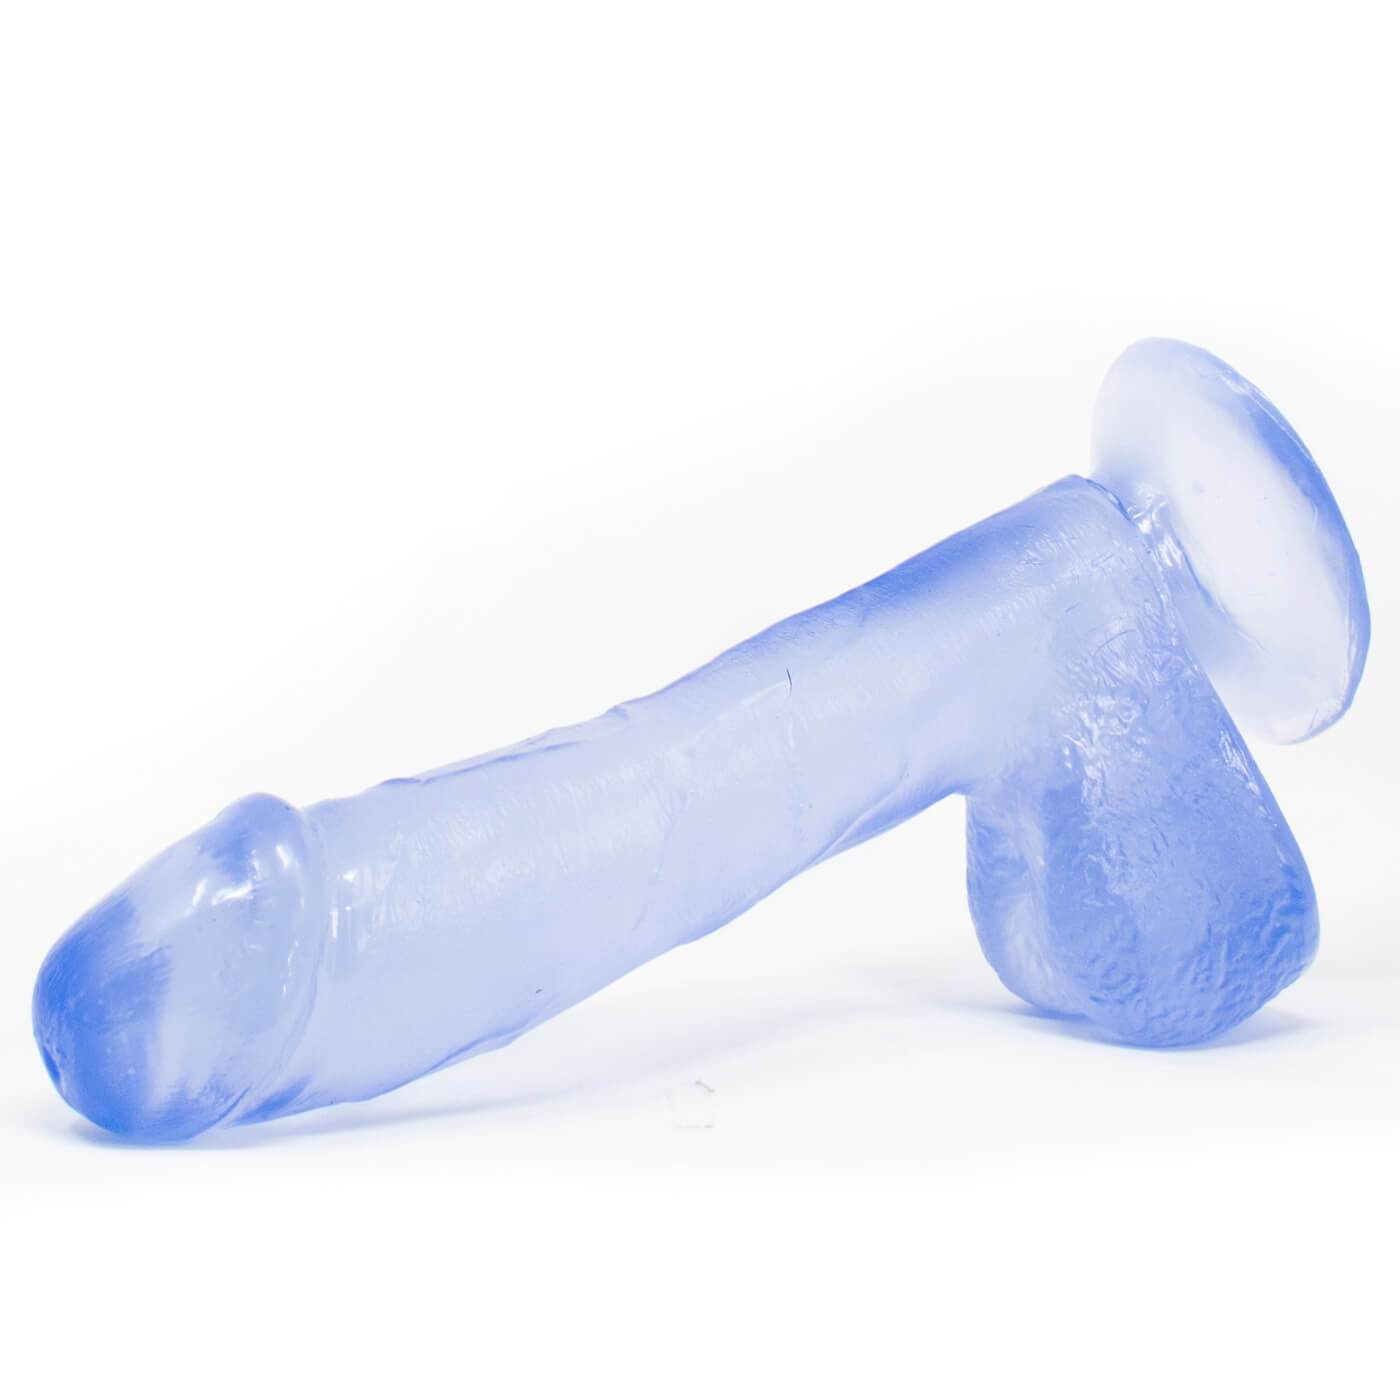 Chaos recommendet circumference dildo anal inch 7.5